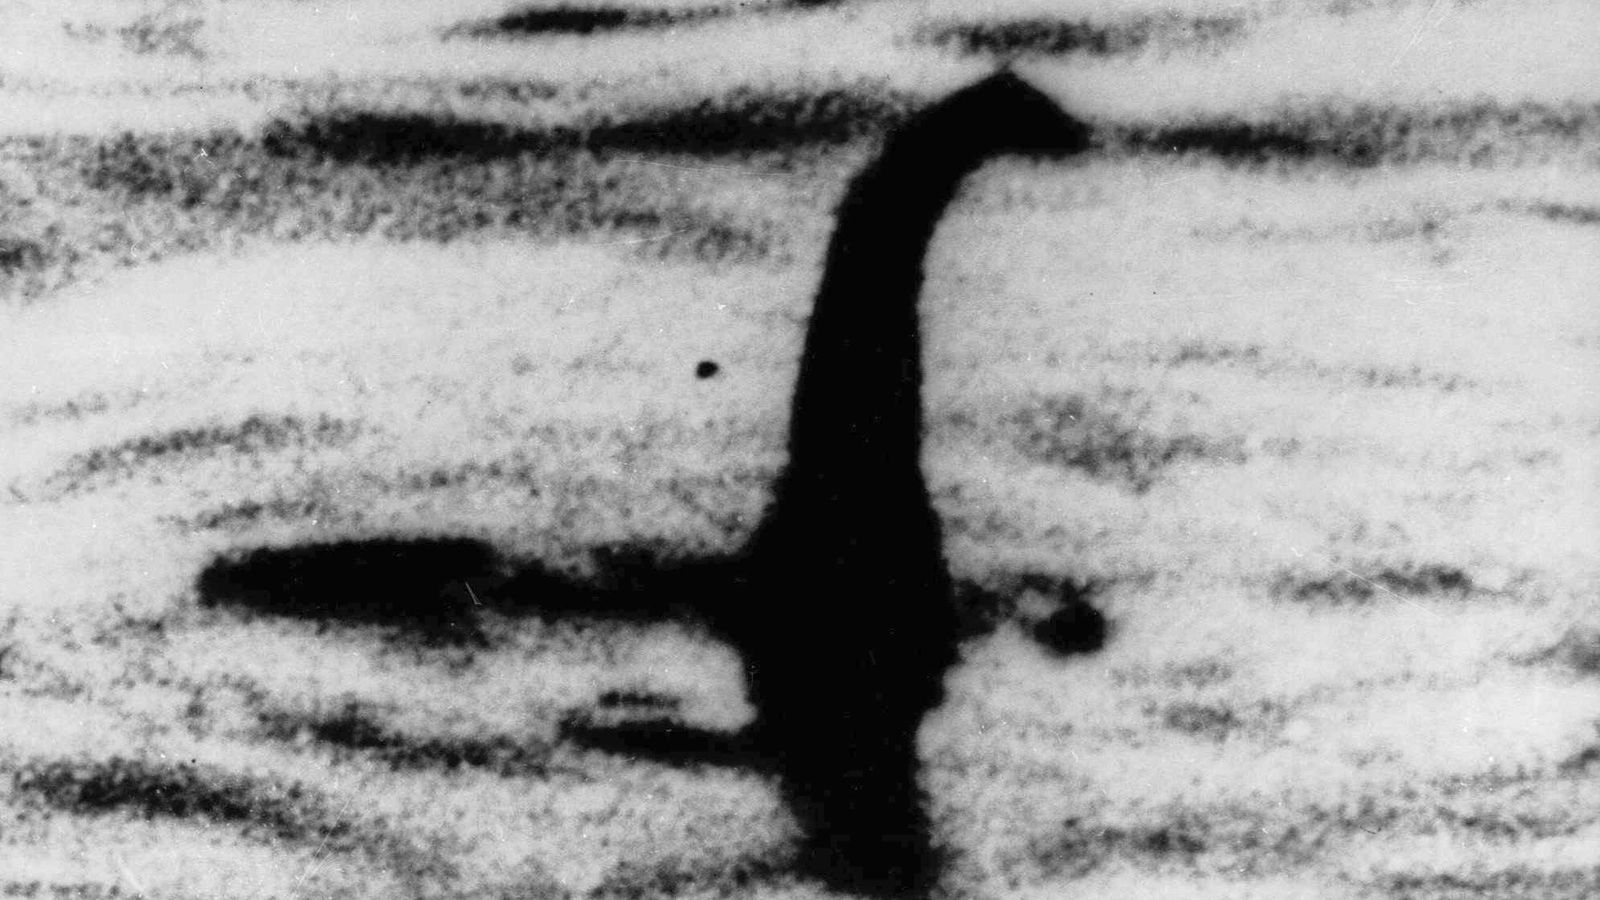 Loch Ness Monster hunters join largest search in decades for mythical beast